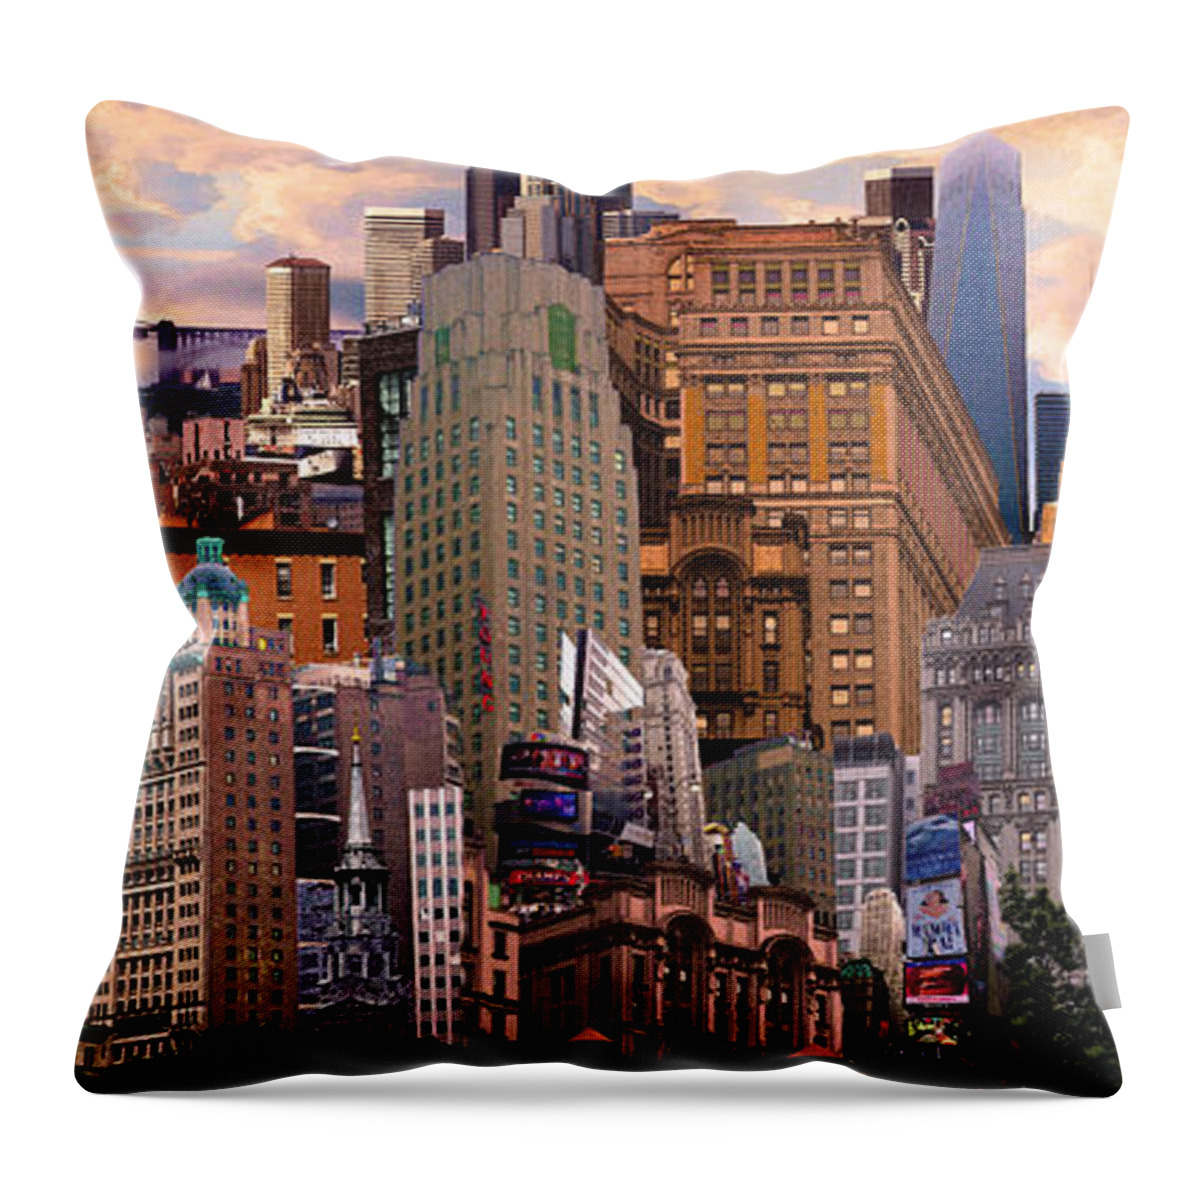 Cityscape Throw Pillow featuring the digital art Cityscape Dream by Paul Gentille